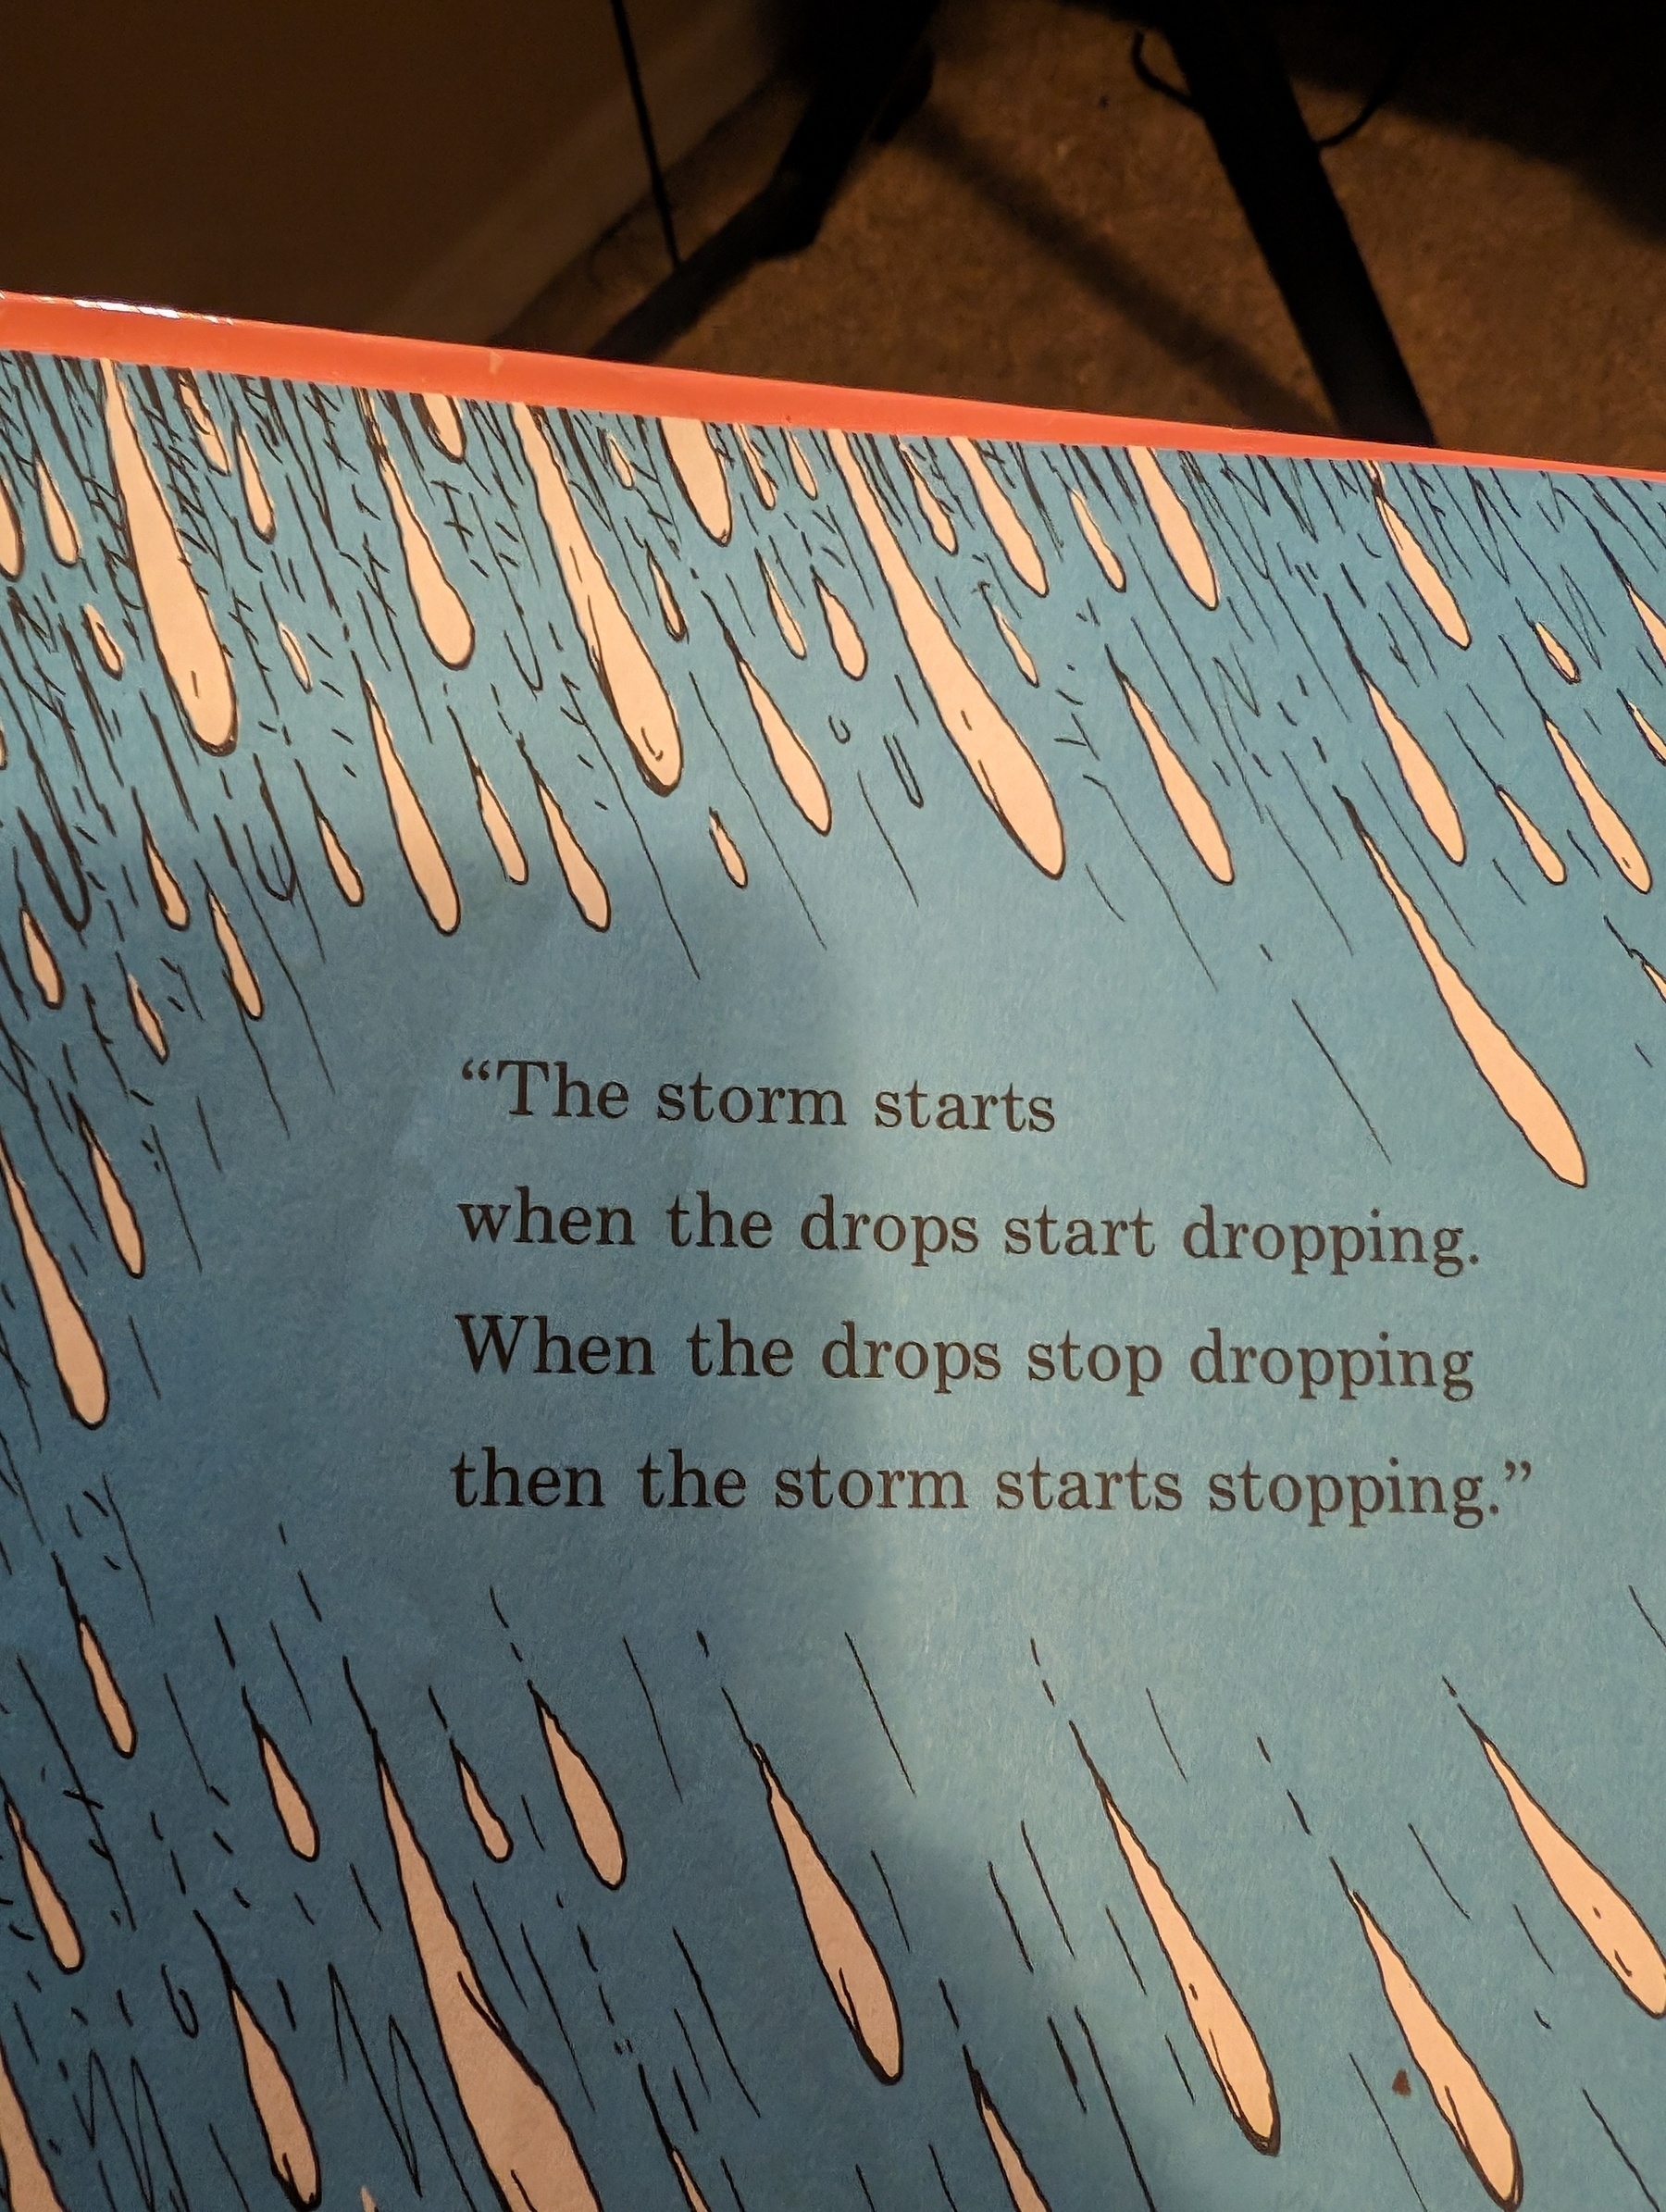 Photo of the last tongue twister in a Doctor Seuss book: "The storm starts when the drops start dropping, When the drops stop dropping, then the storm starts stopping."